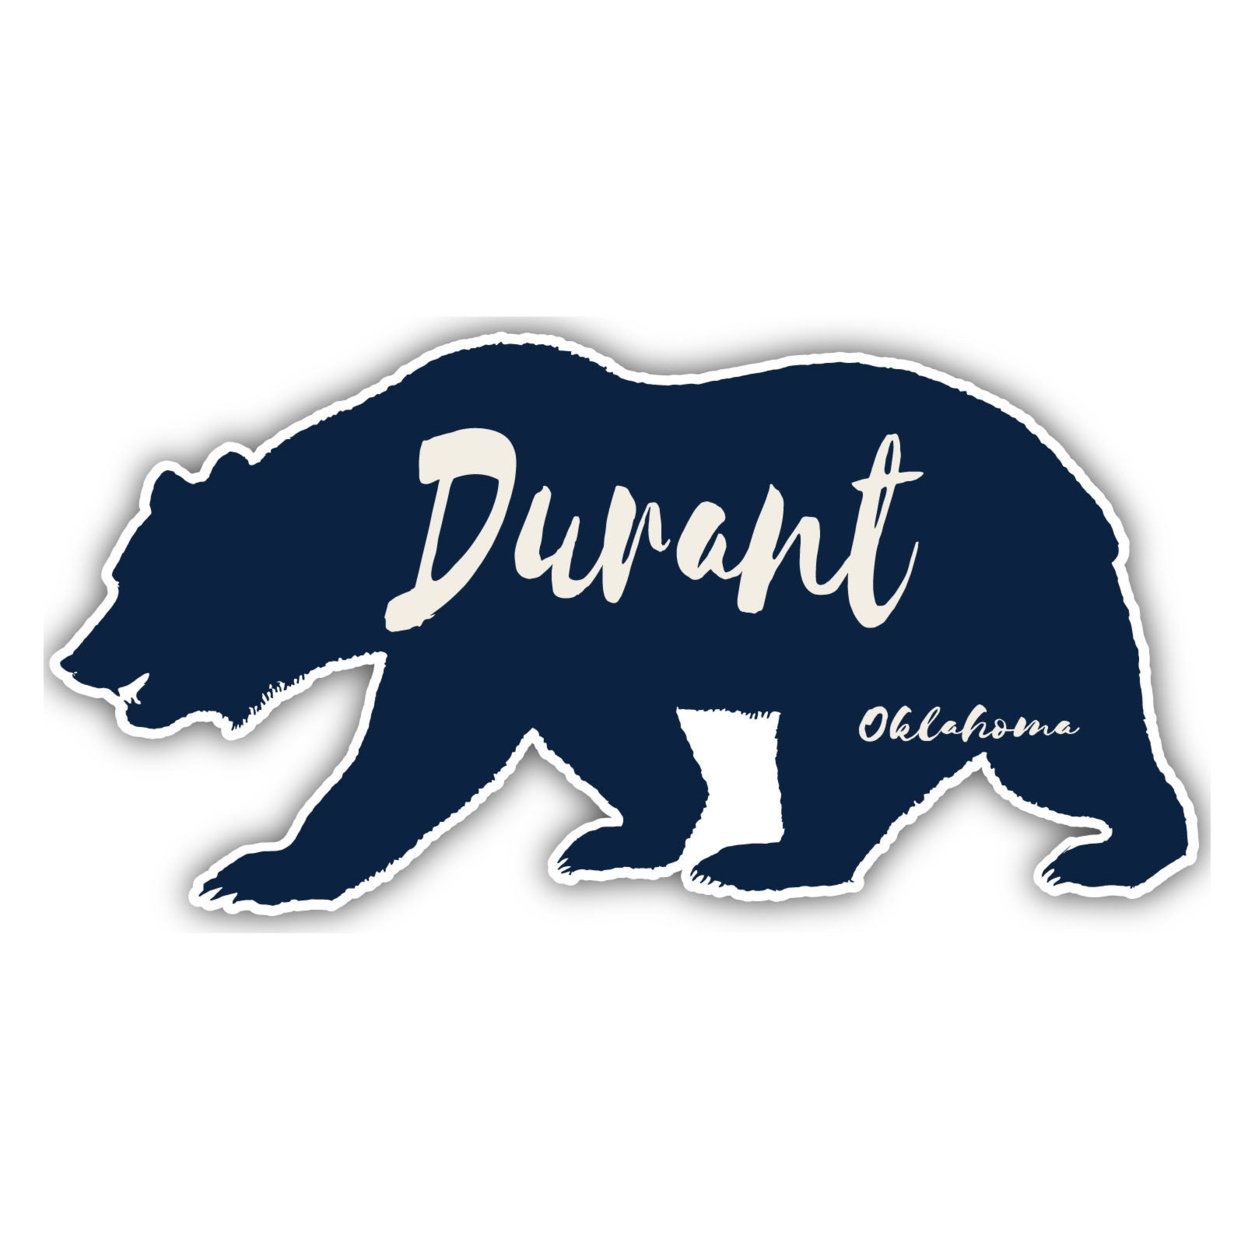 Durant Oklahoma Souvenir Decorative Stickers (Choose Theme And Size) - 4-Pack, 10-Inch, Bear